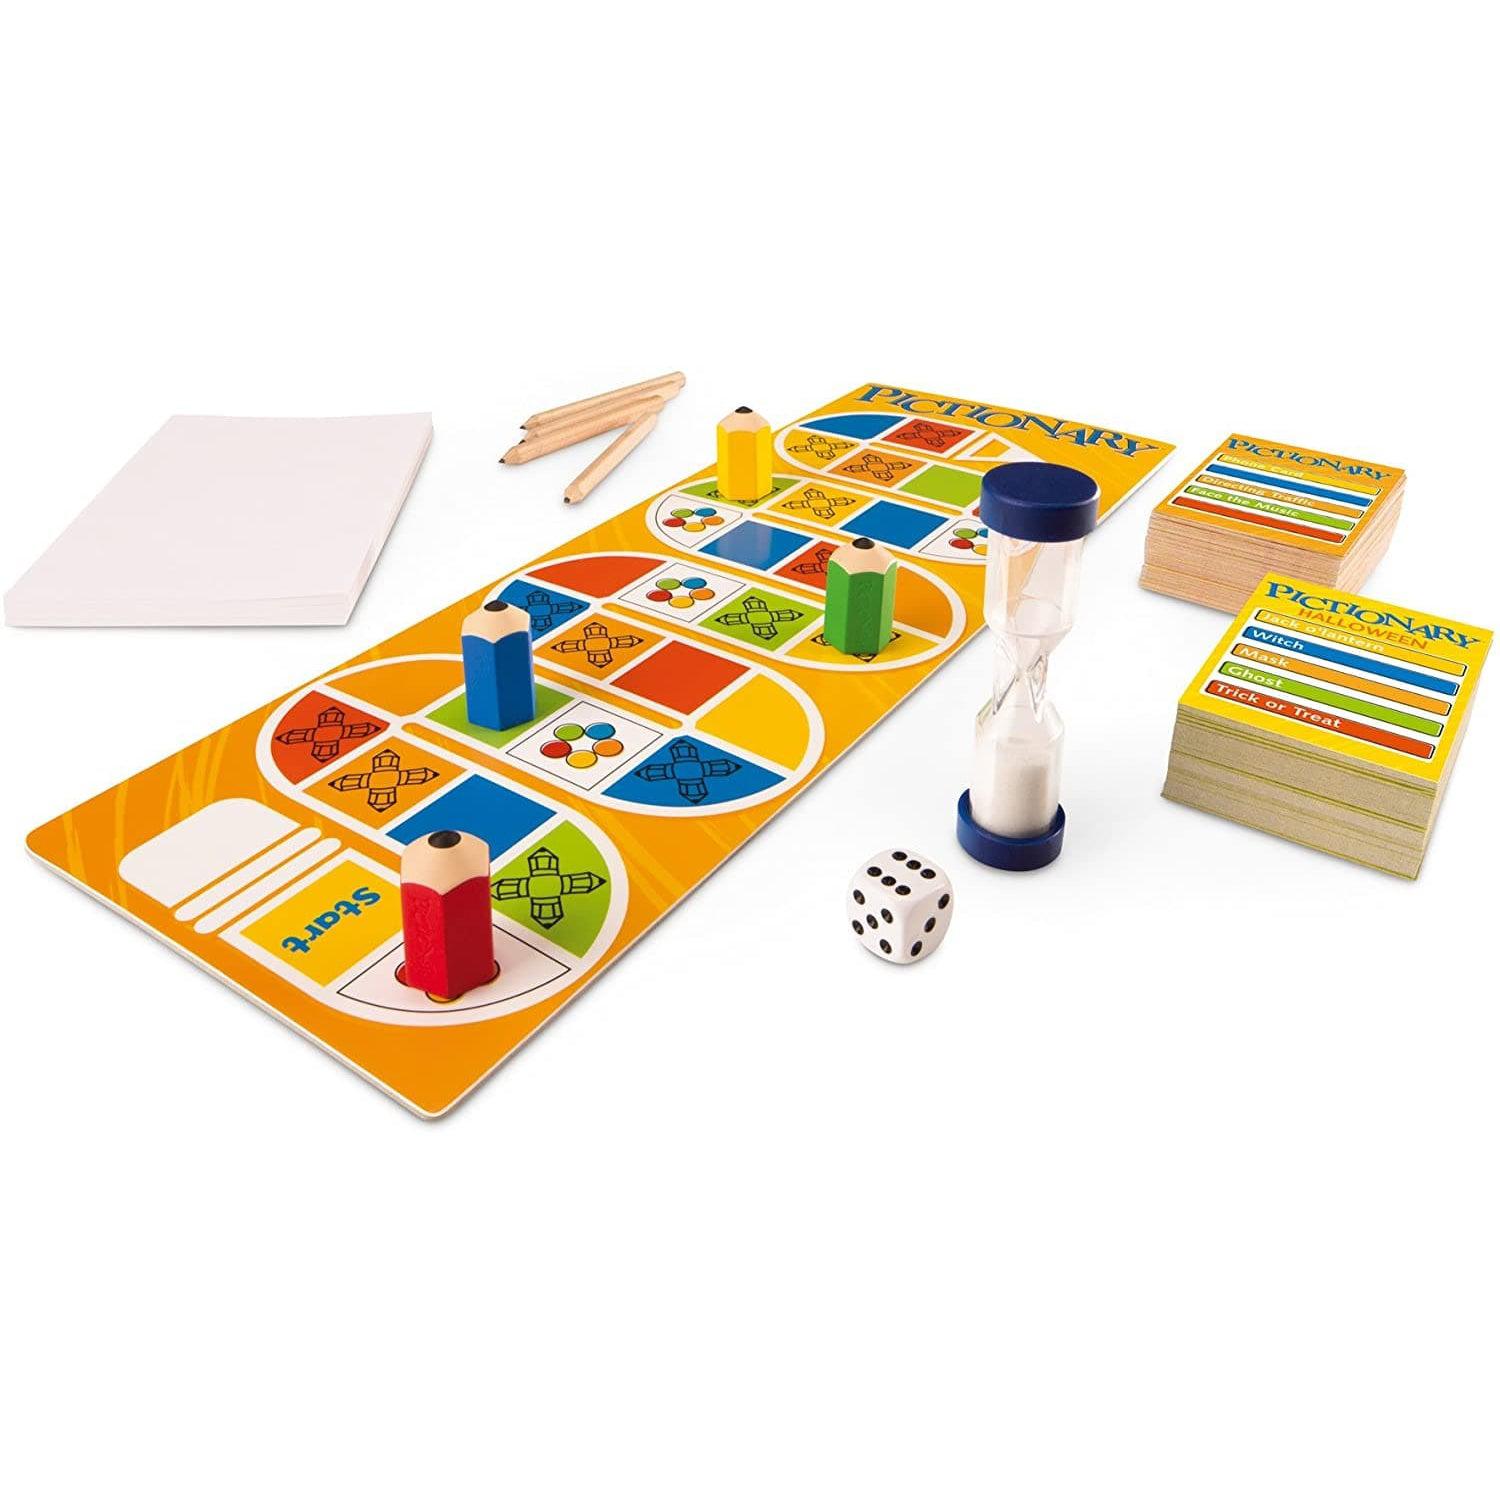 Mattel-Pictionary Game-DKD47-Legacy Toys